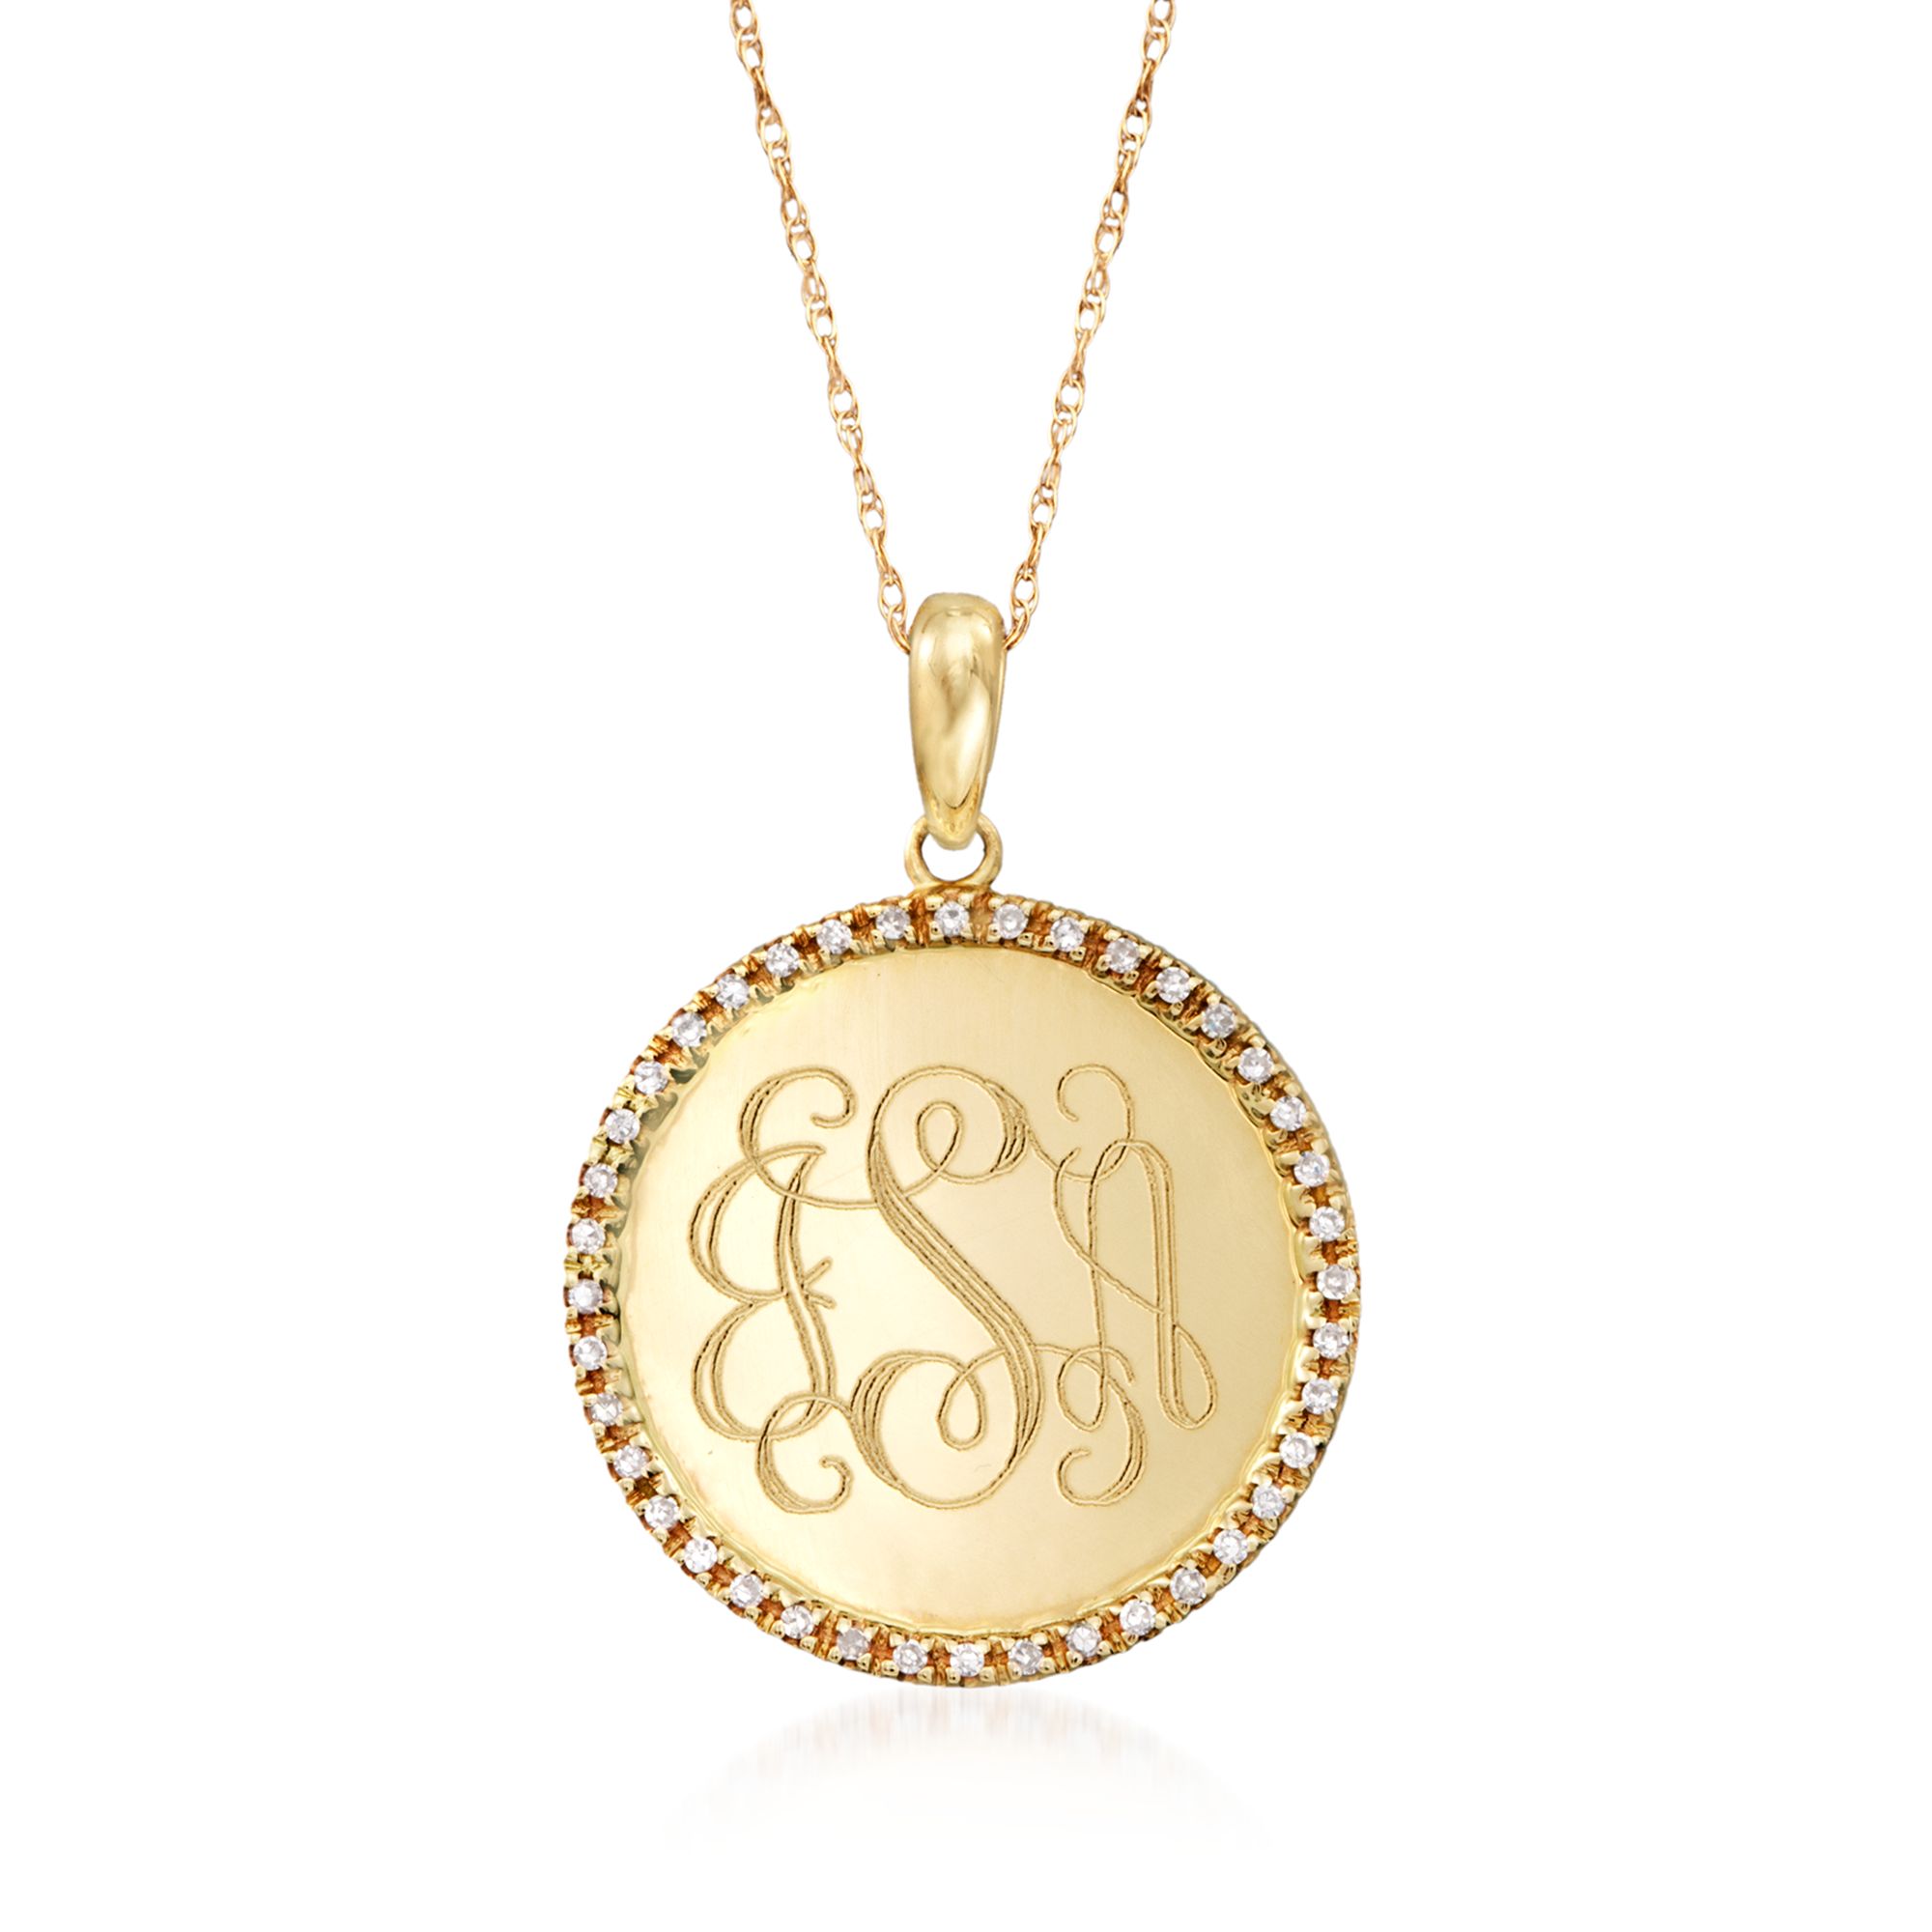 Solid 925 Sterling Silver with Gold-Toned Clemson University Large Disc Pendant 21mm x 30mm